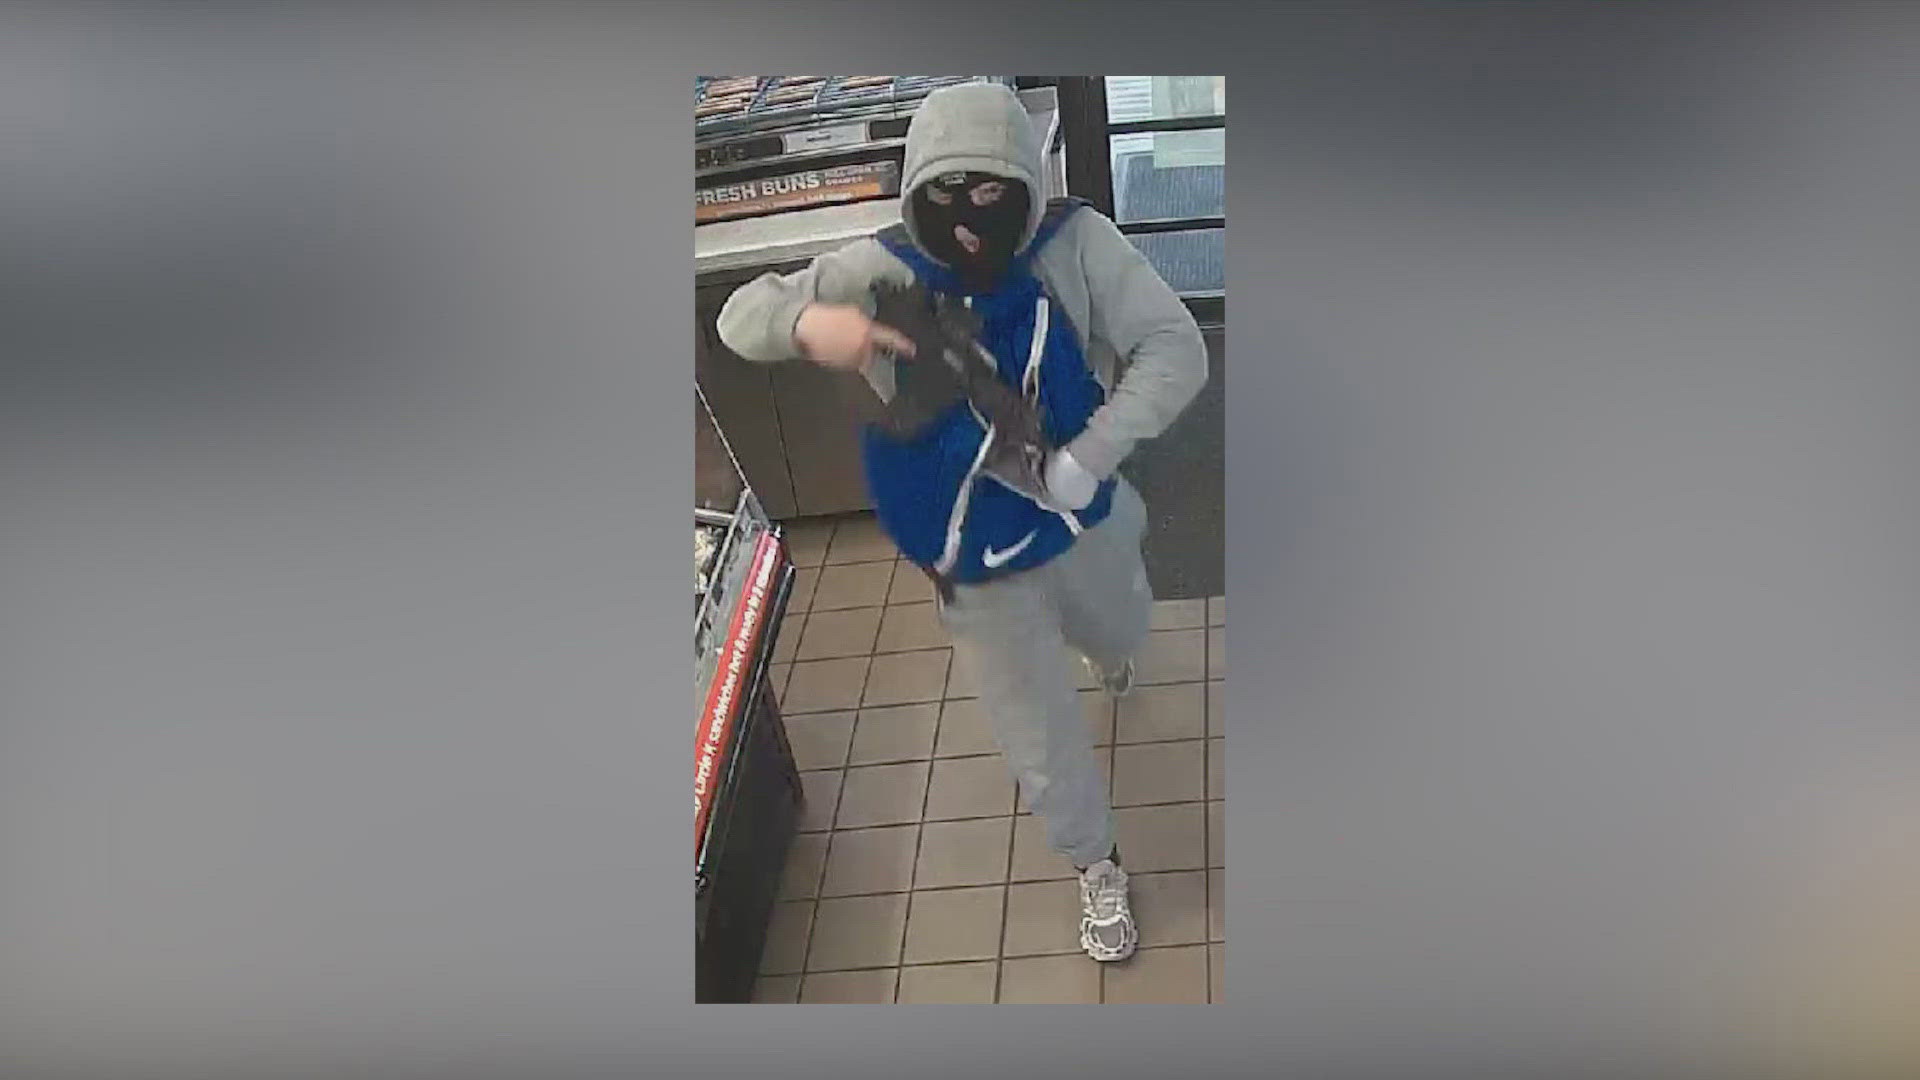 Police searching for man who robbed gas staion cashier at gunpoint